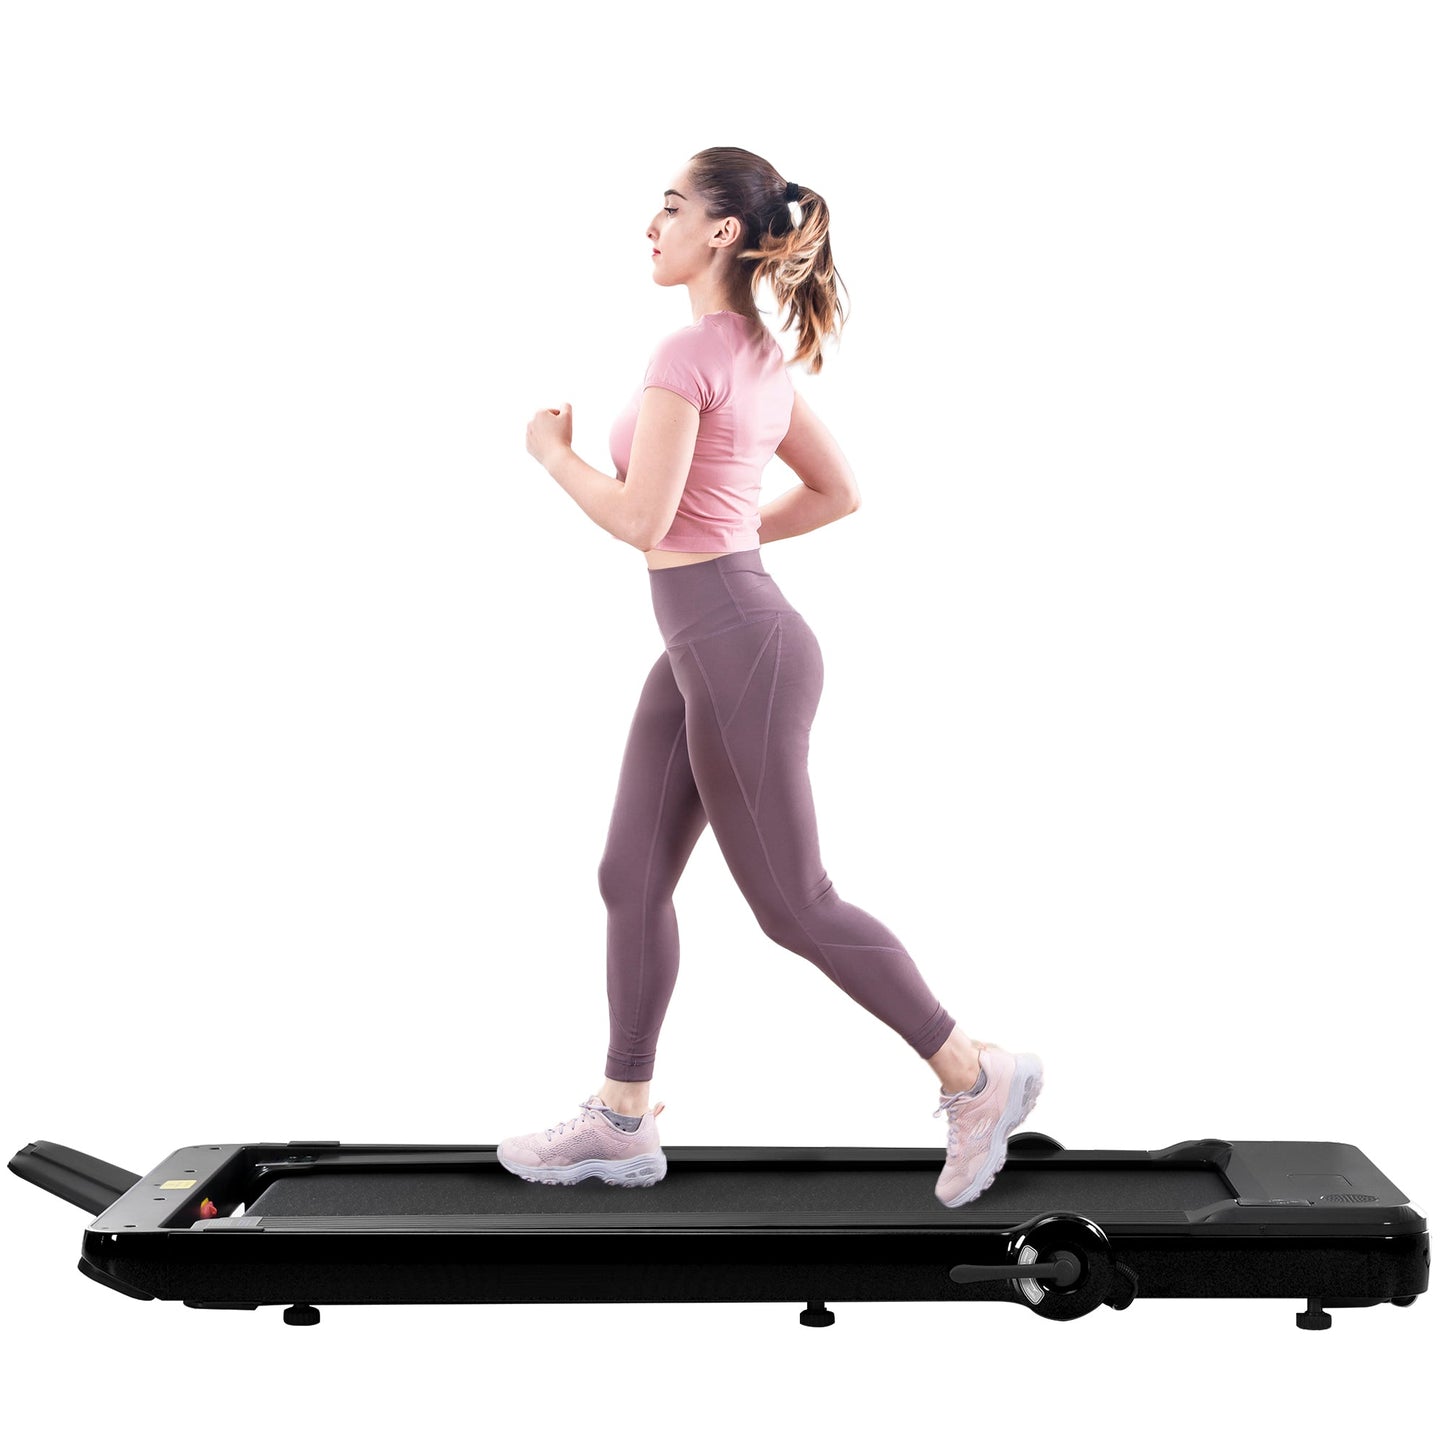 Cruce Electric Folding Treadmill, Installation Free with Bluetooth APP and Speaker, Remote Control with Display for Home, Gym & Office